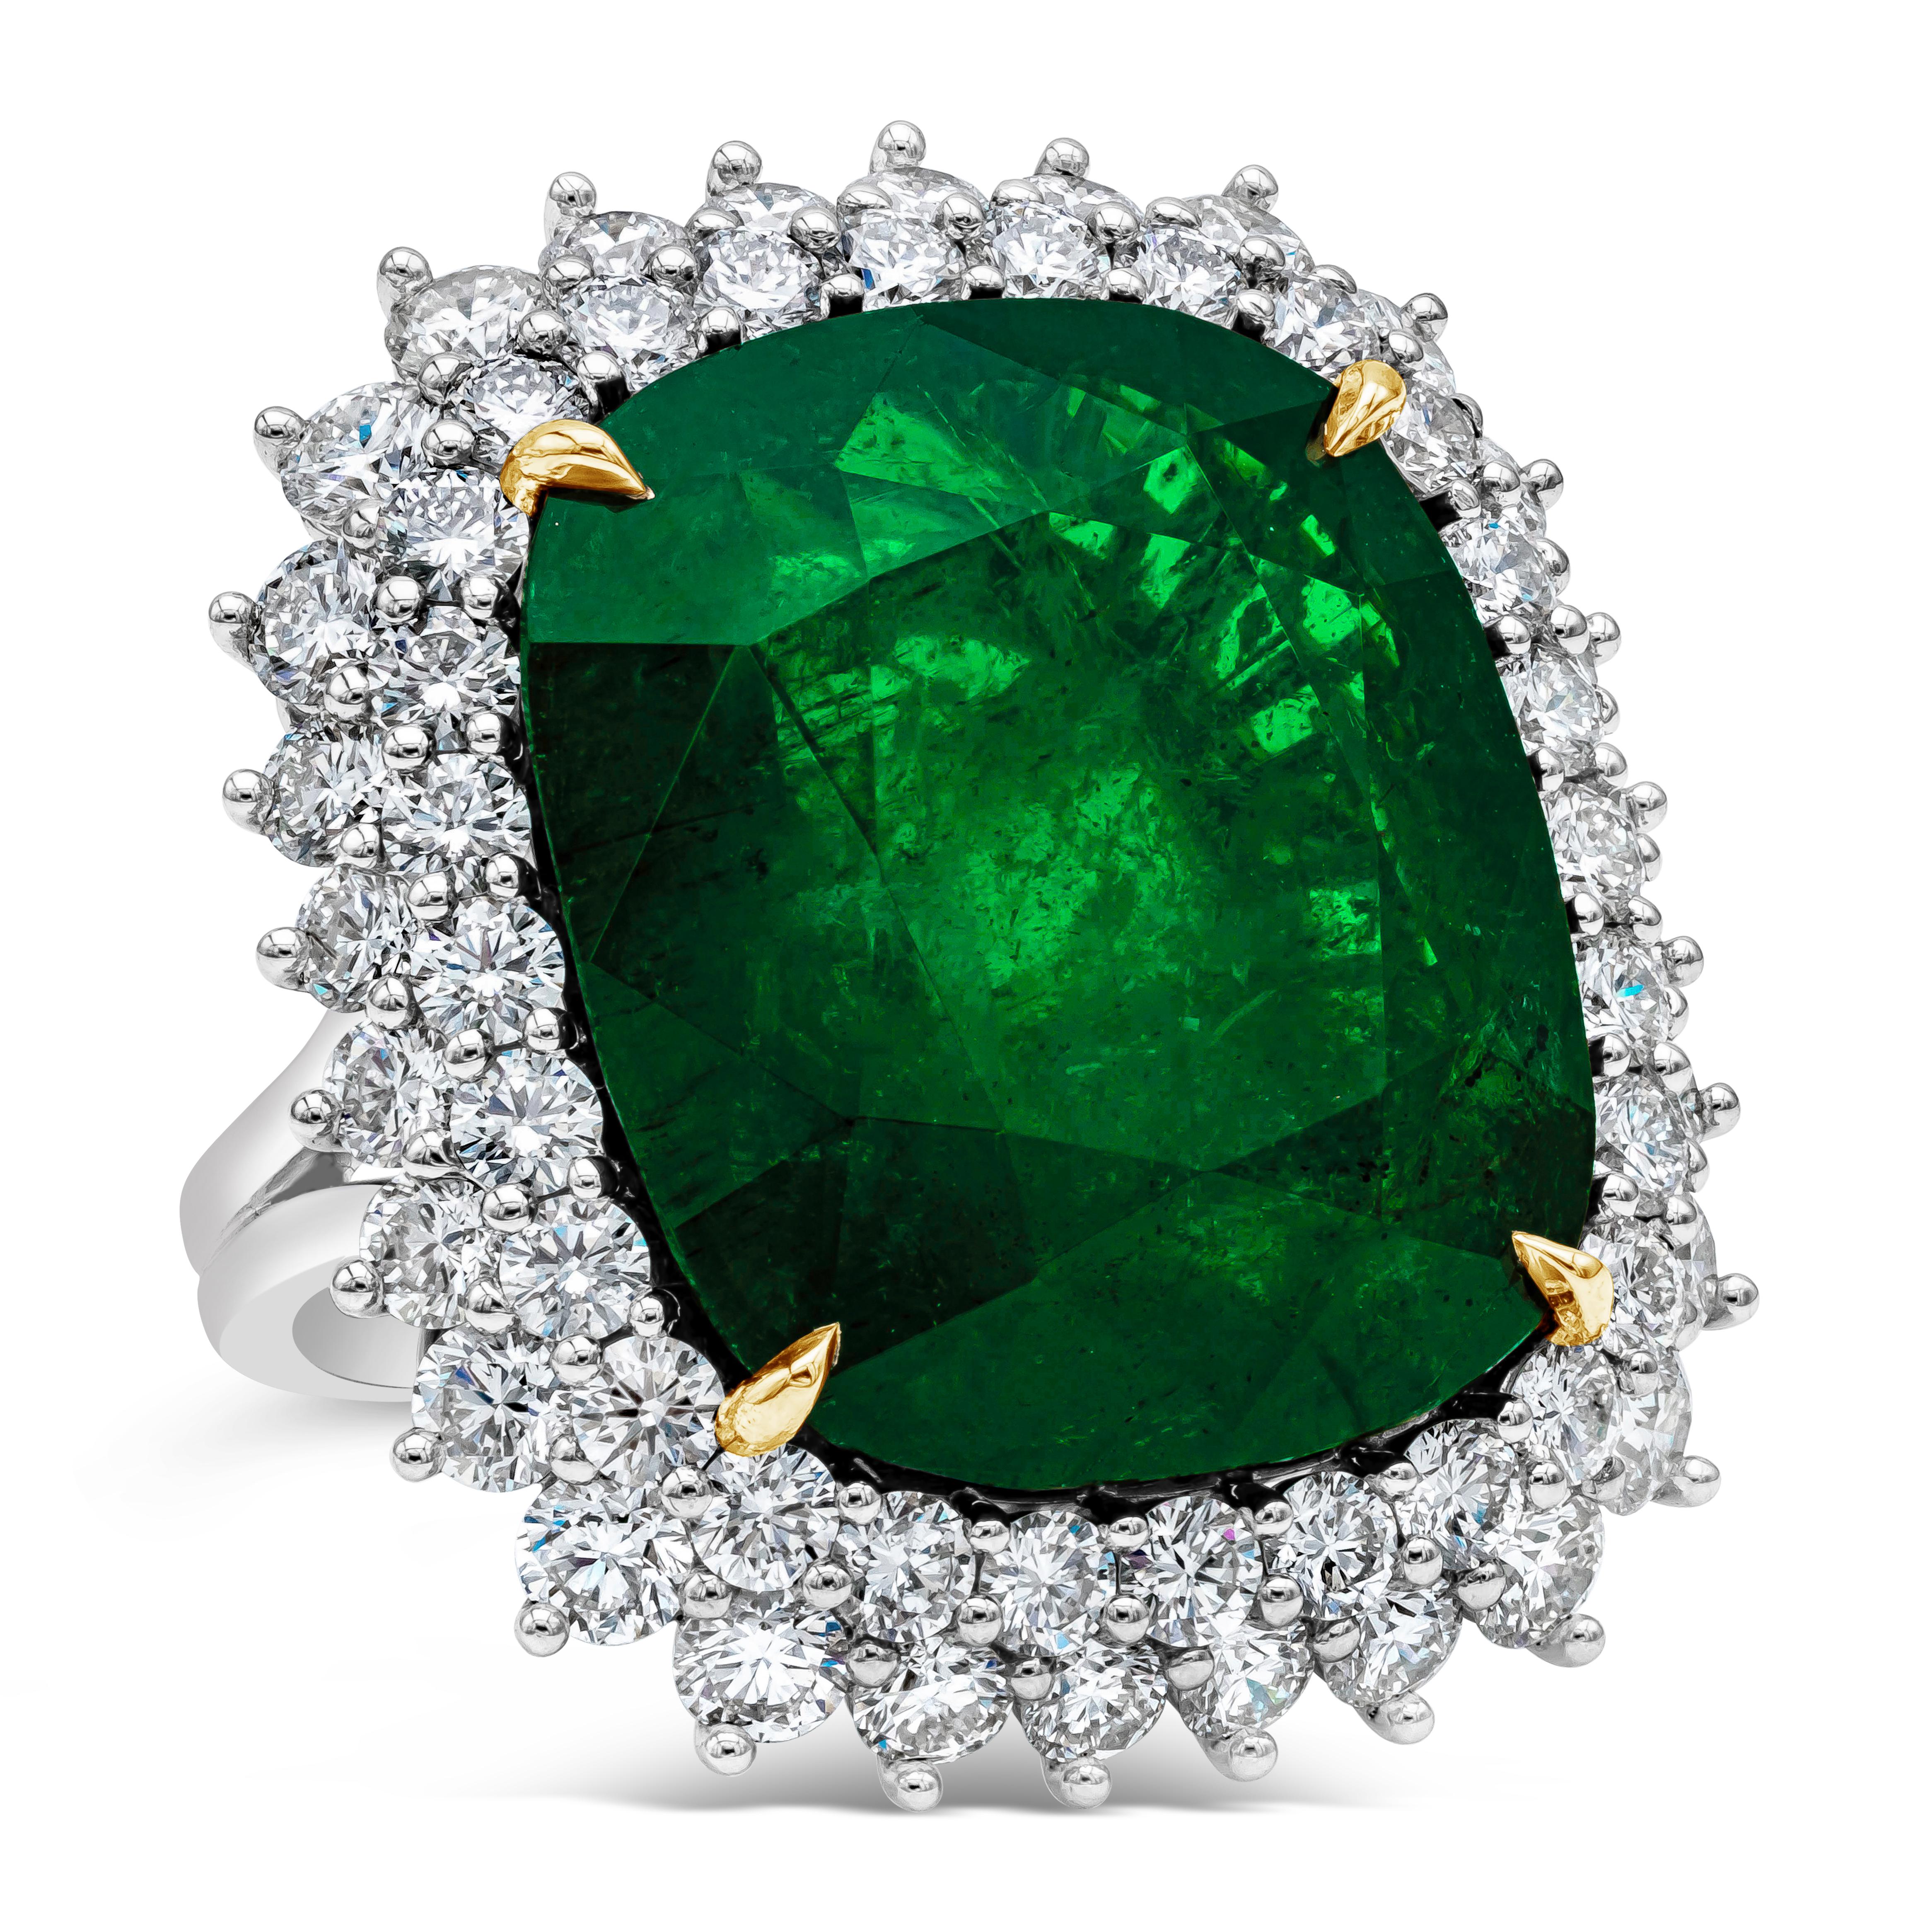 Elegant and well crafted high end cocktail ring showcasing a GIA certified 24.75 carat cushion cut green emerald gemstone surrounded by 56 round brilliant diamonds weighing 3.98 carats total,F-G color and VS clarity. Center gemstone is set in an 18k